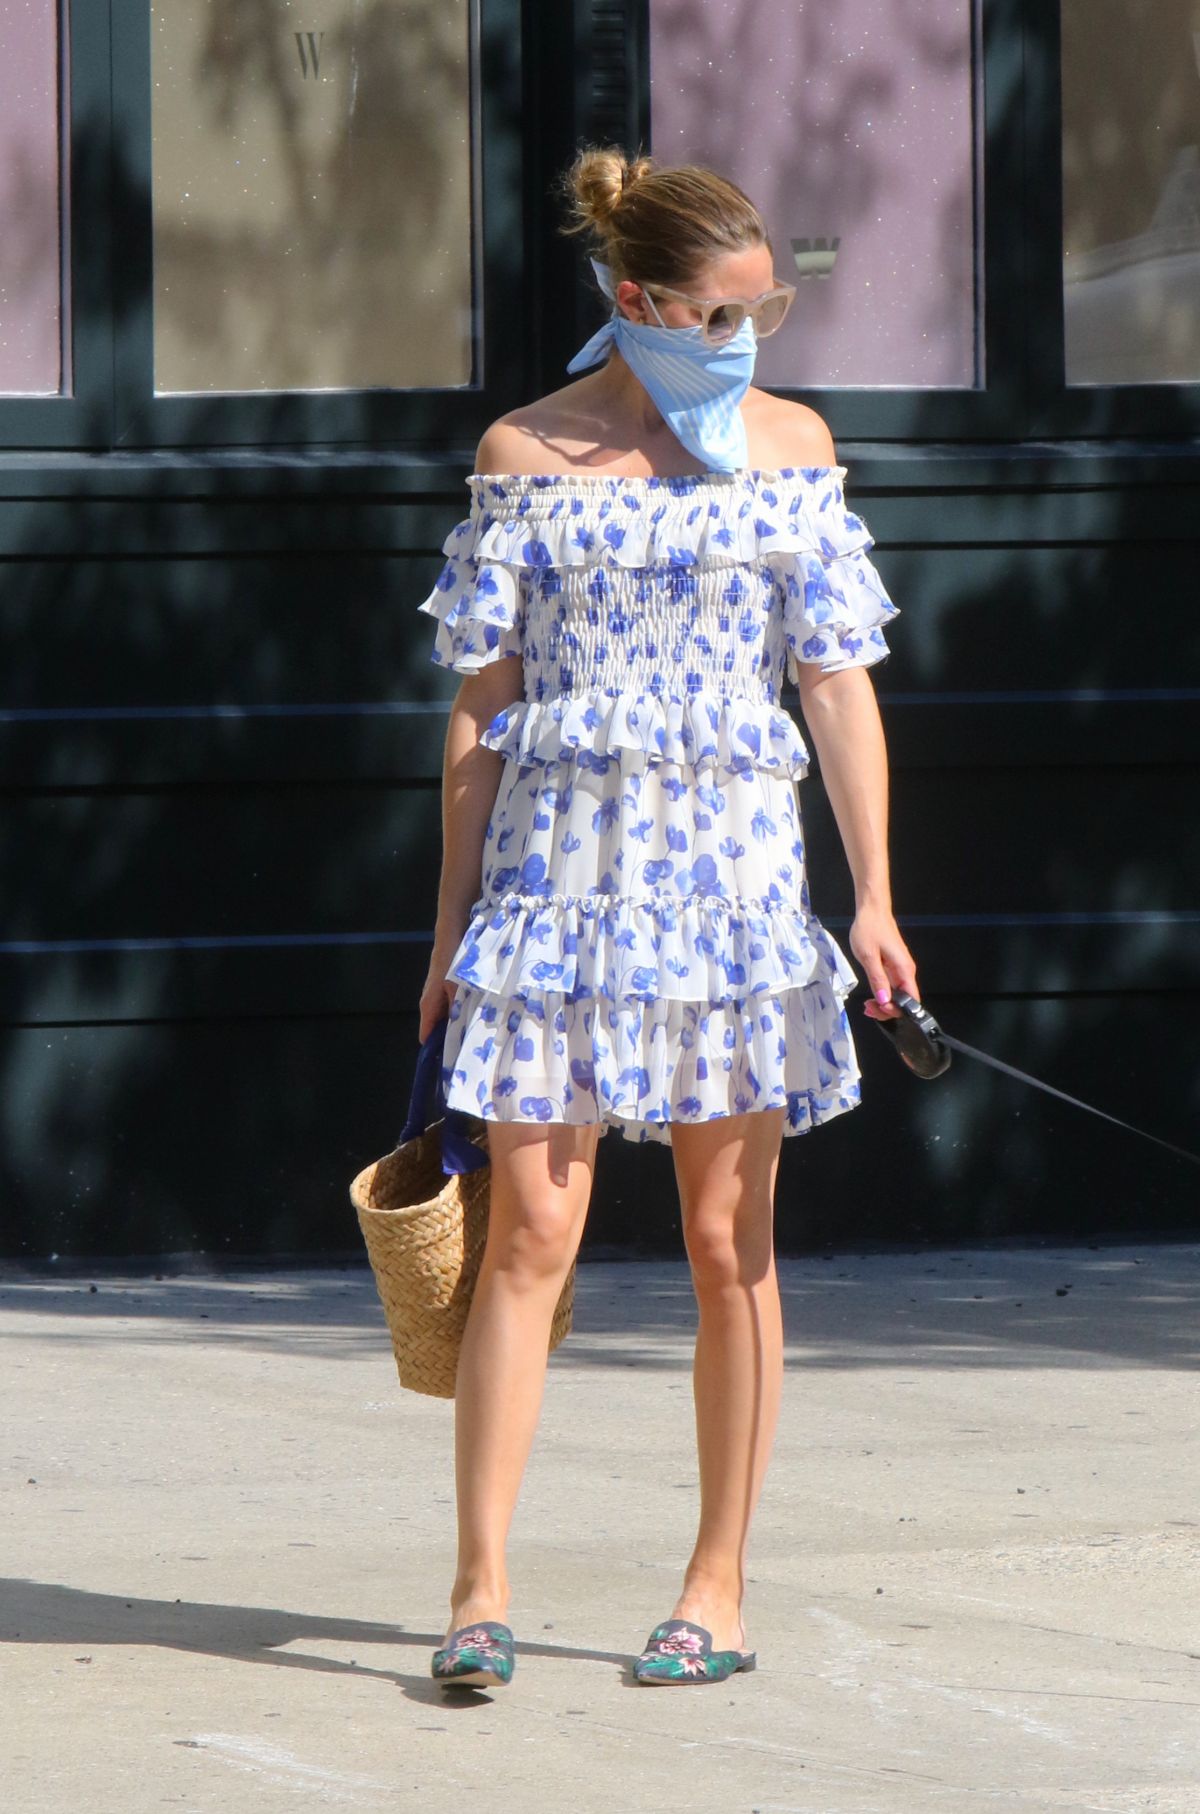 olivia-palermo-out-with-her-dog-in-brooklyn-07-30-2020-5.jpg